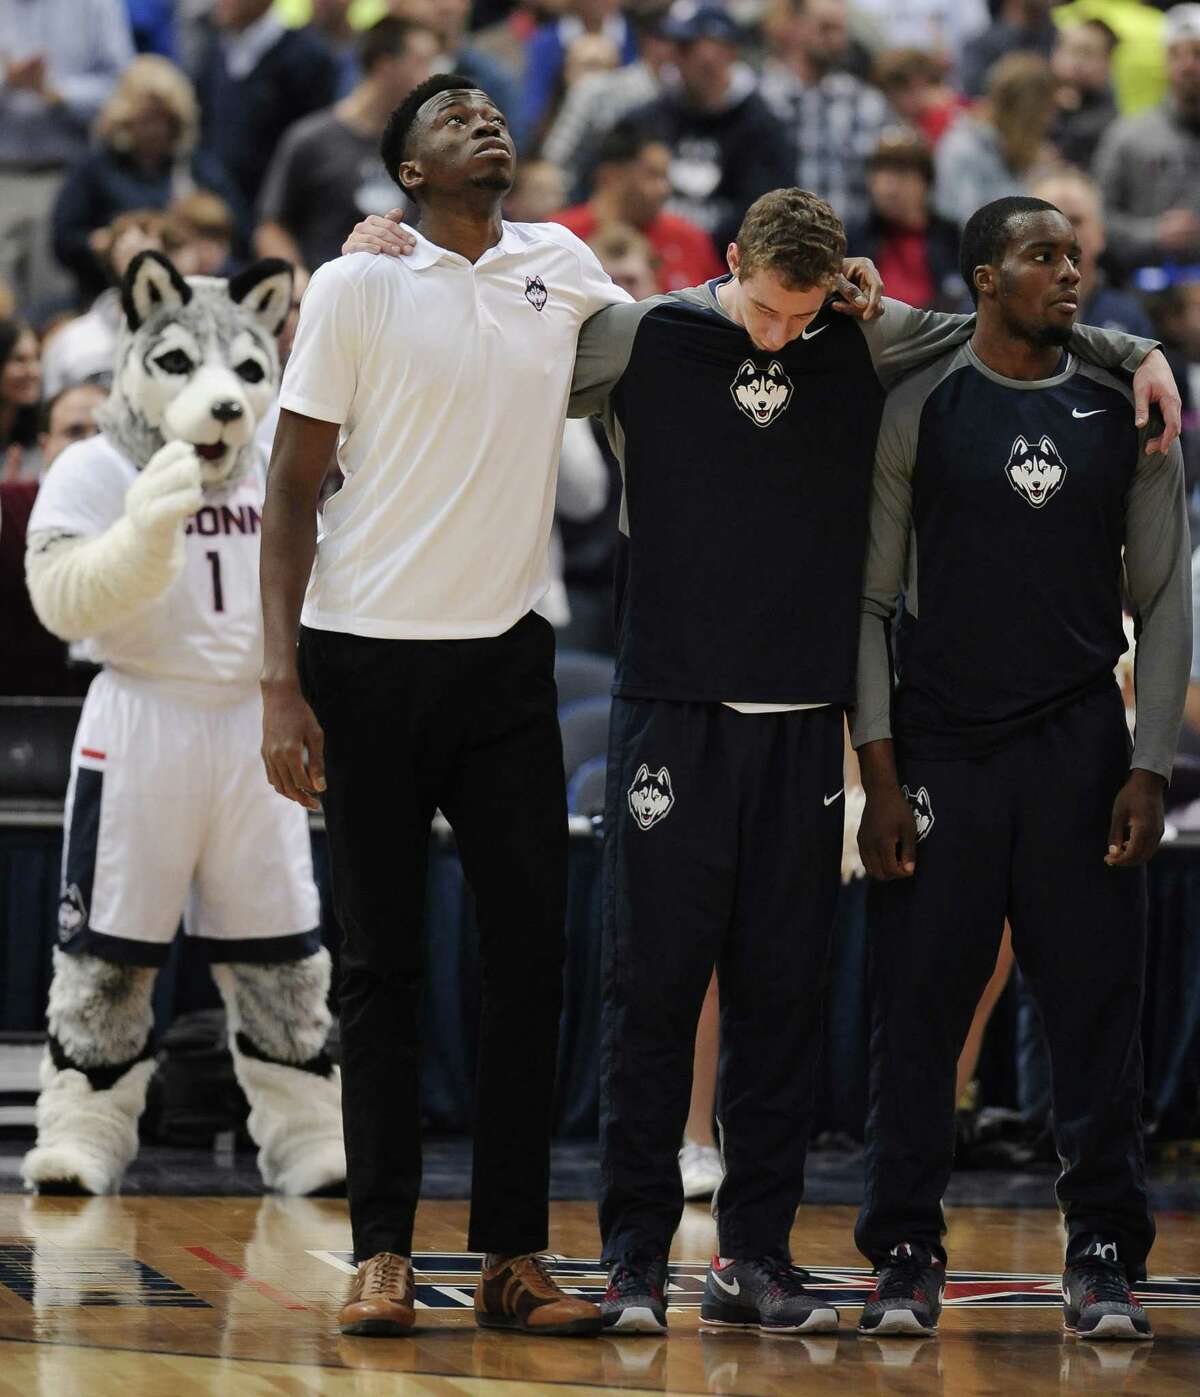 UConn’s Amida Brimah, left, looks up during the playing of the national anthem before Sunday’s game in Hartford.